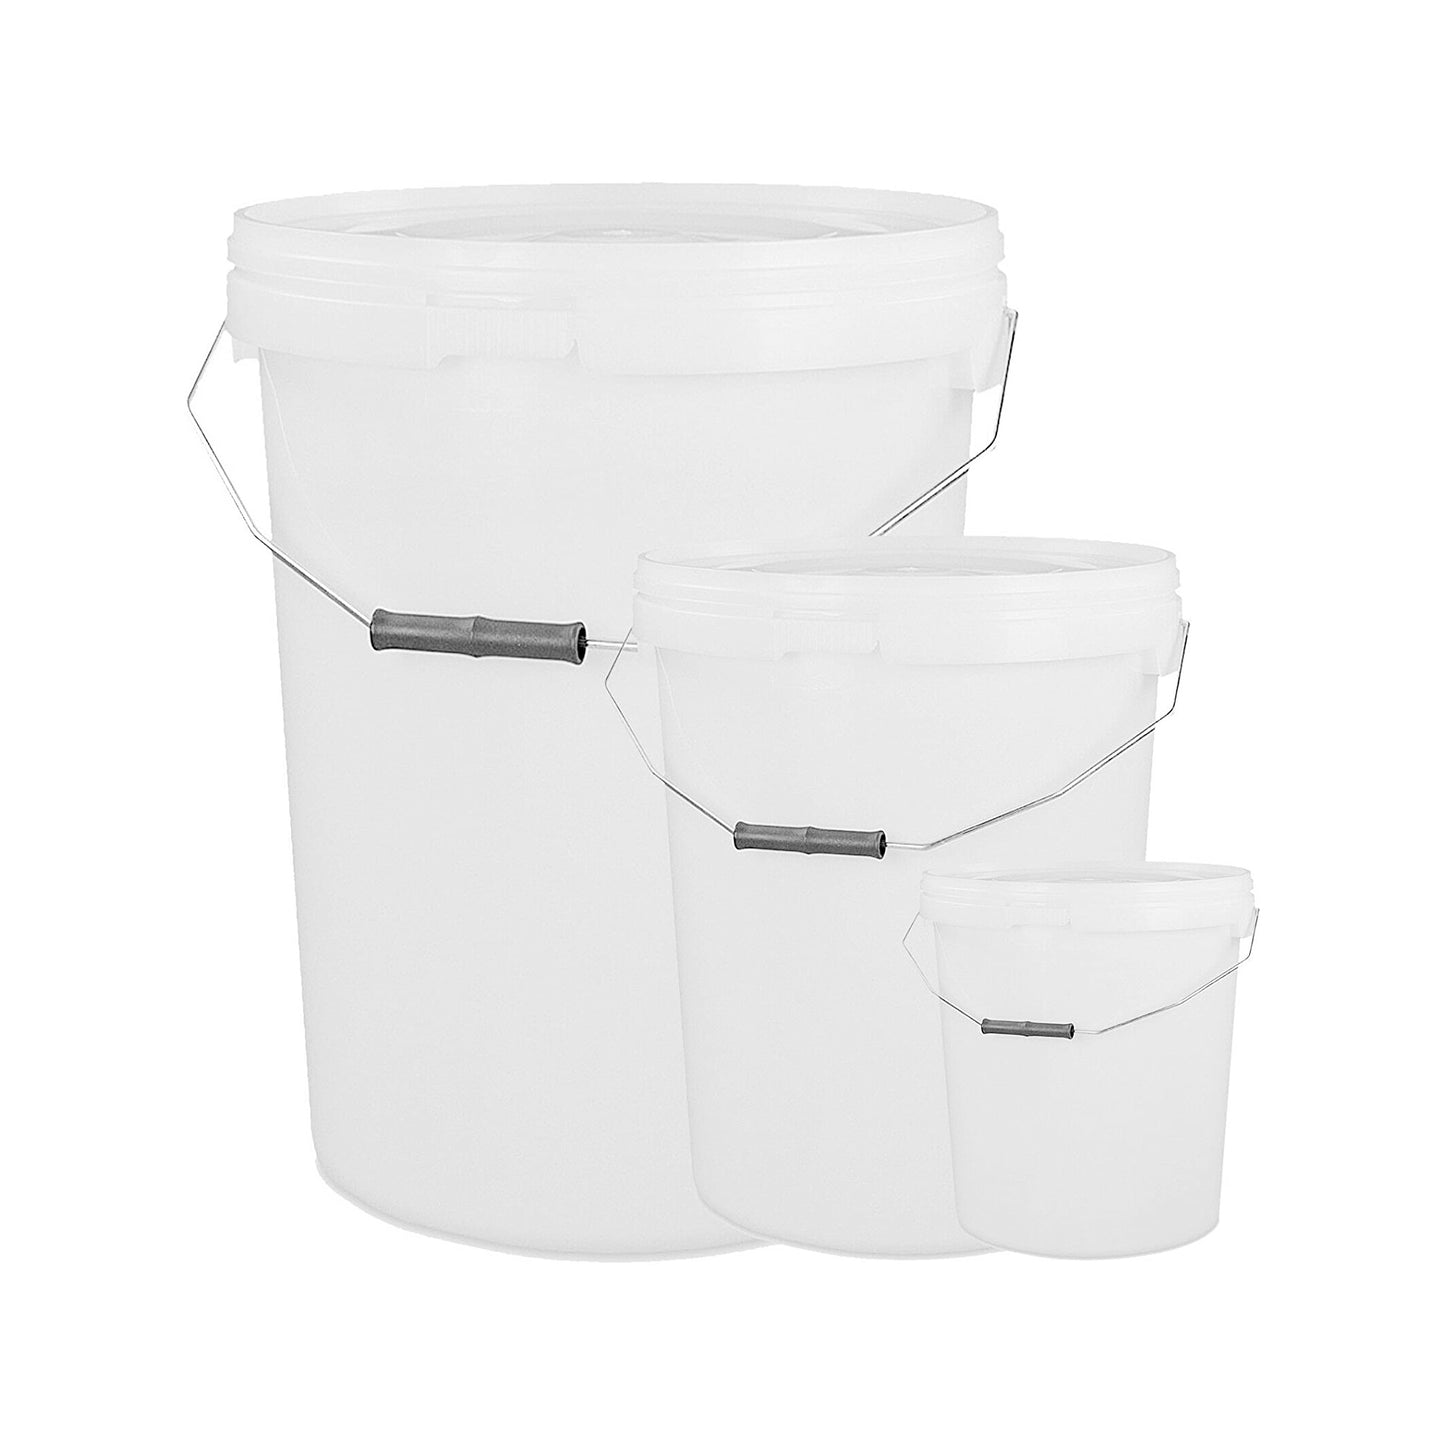 Black & White Strong 5L 10L 25L Hard Wearing Plastic Buckets With Tamper Evident Lids & Handles